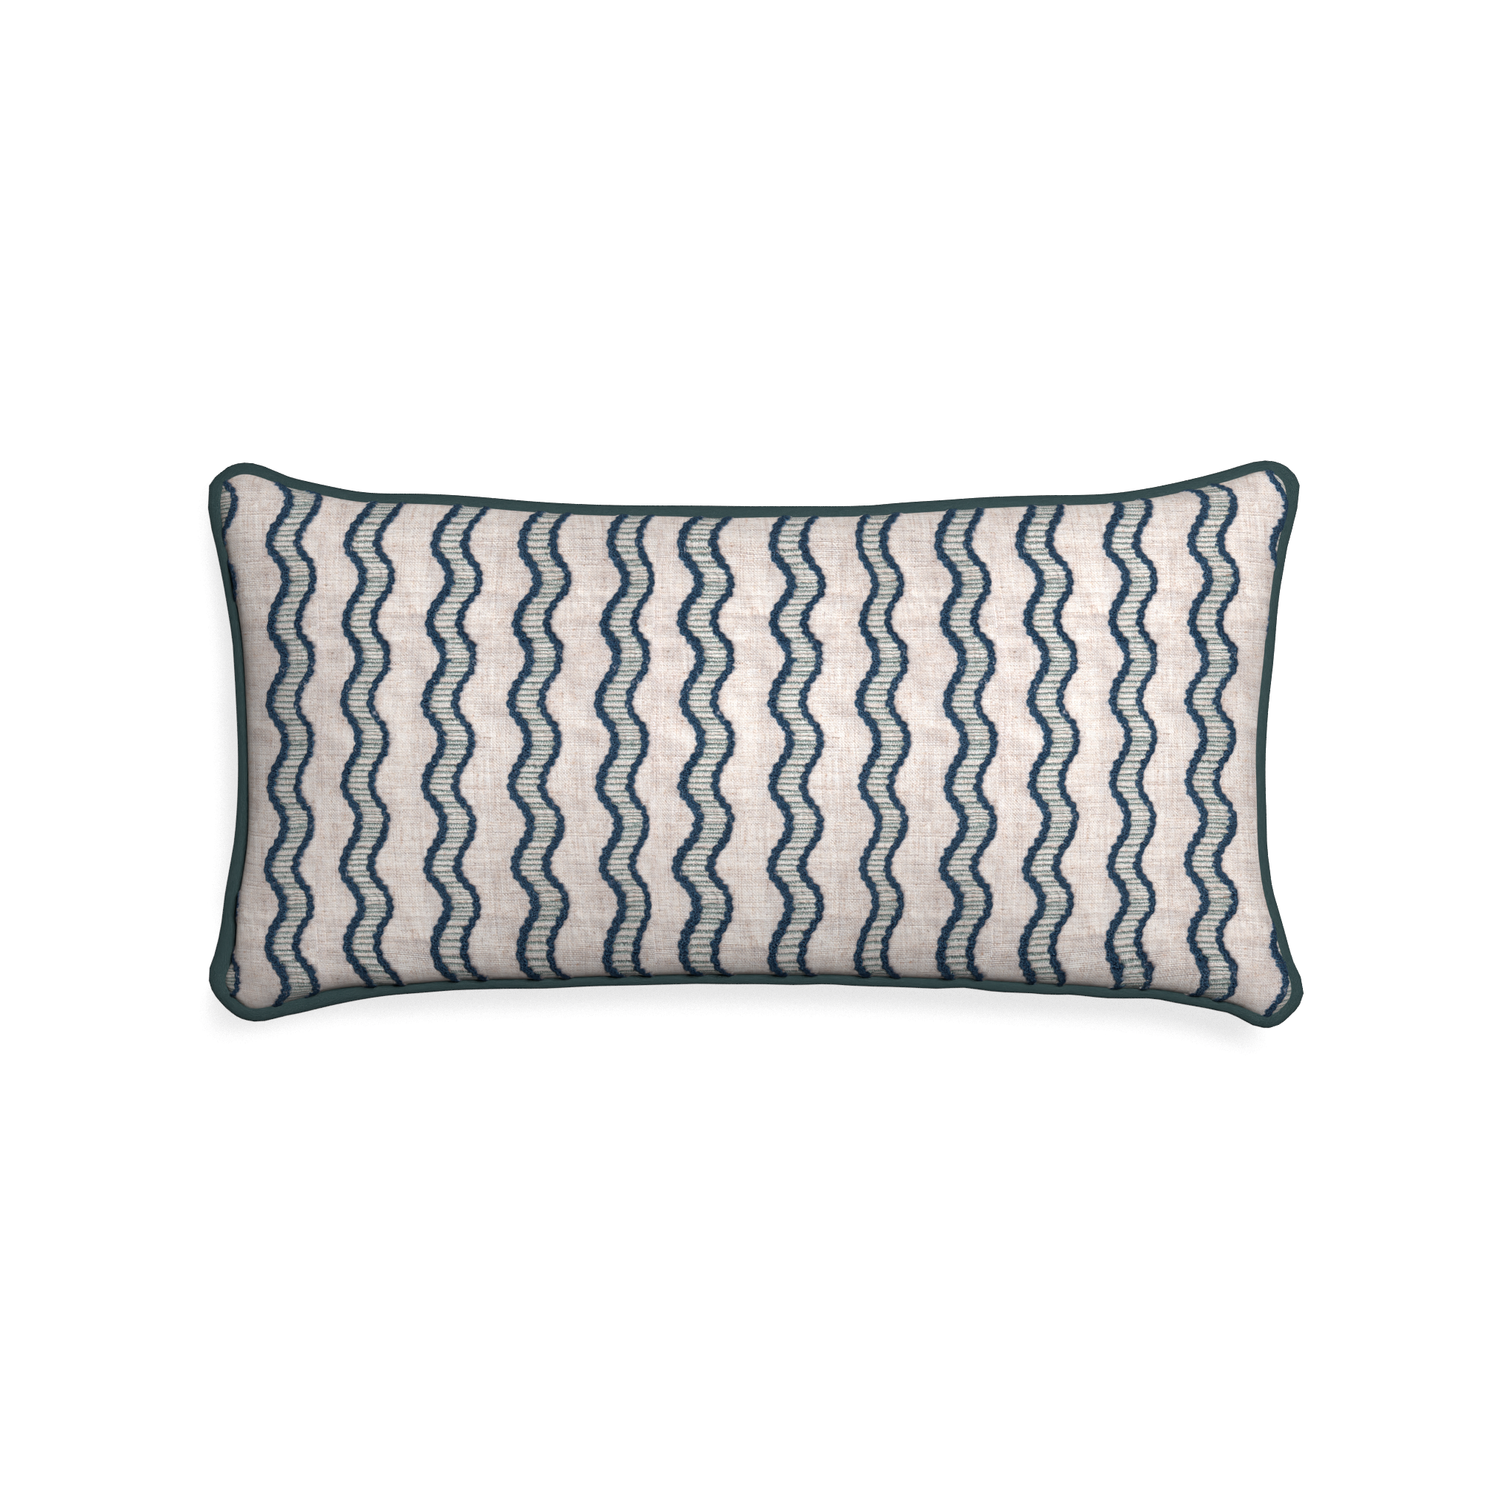 Midi-lumbar beatrice custom embroidered wavepillow with p piping on white background